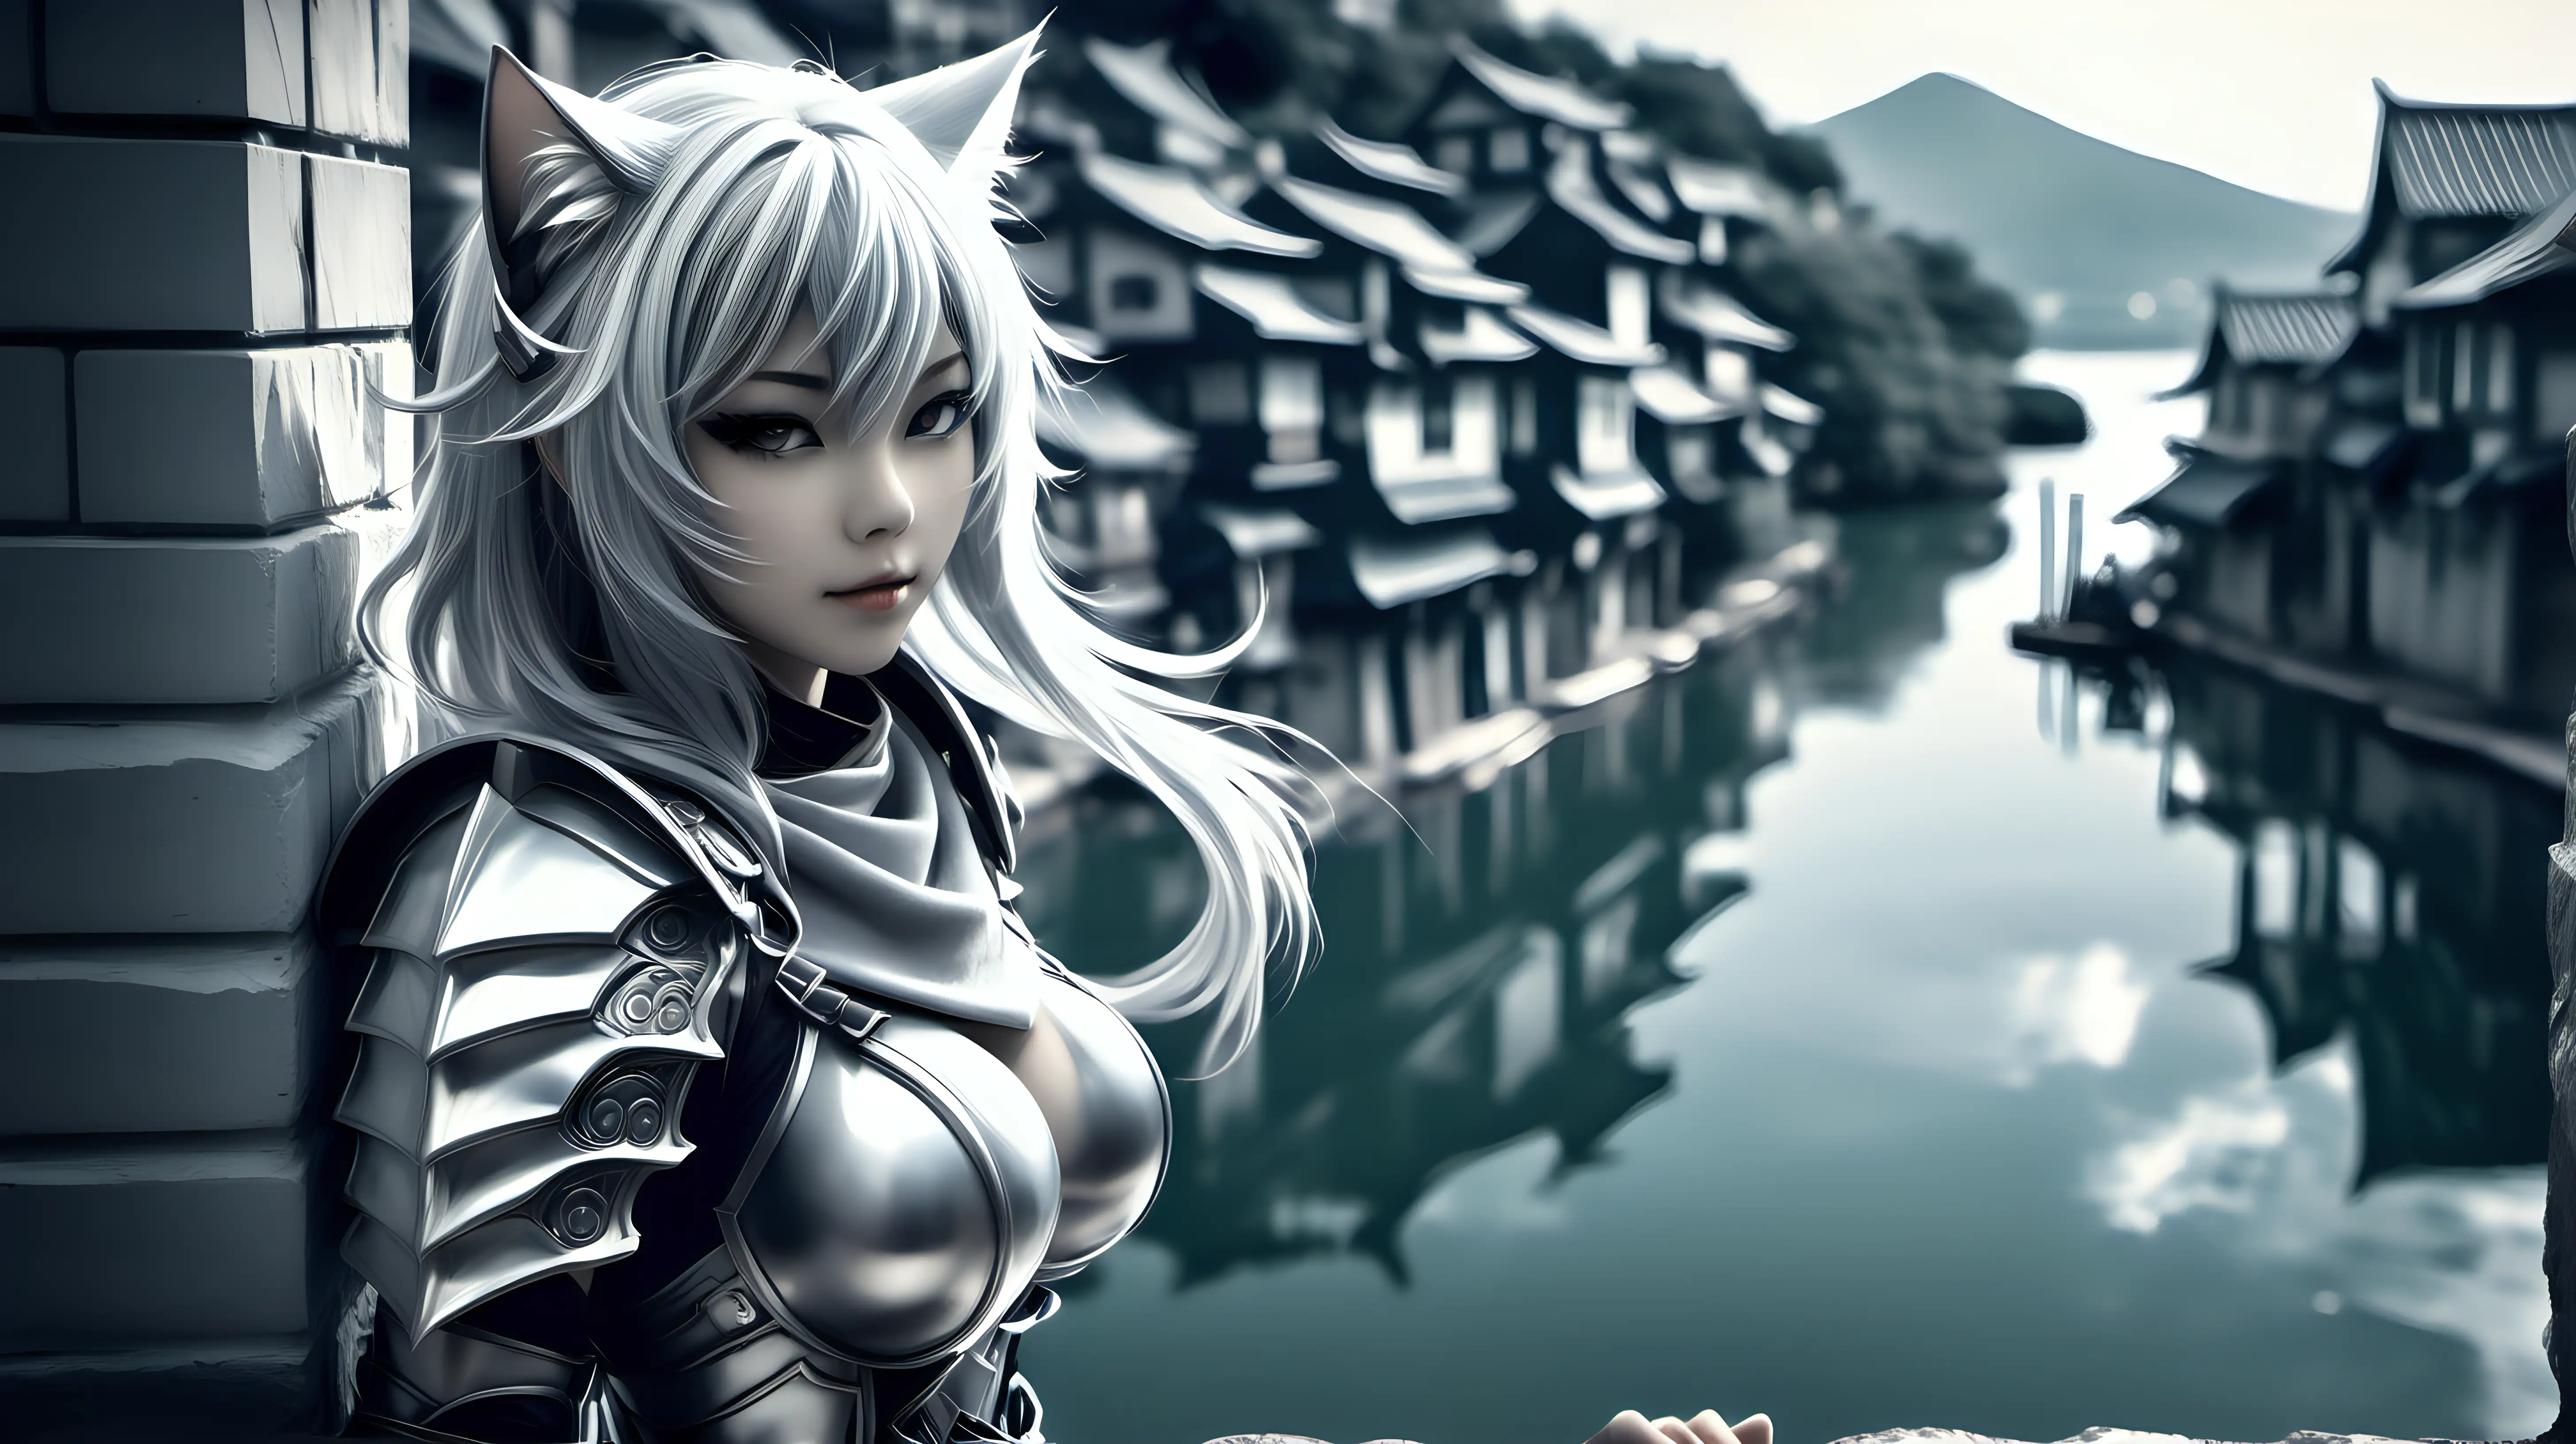 Beautiful silver haired nekomimi woman wearing lite armor in a fantasy city with a lake running through it, fantasy world environment, leaning on wall, black and white , high detail, anime